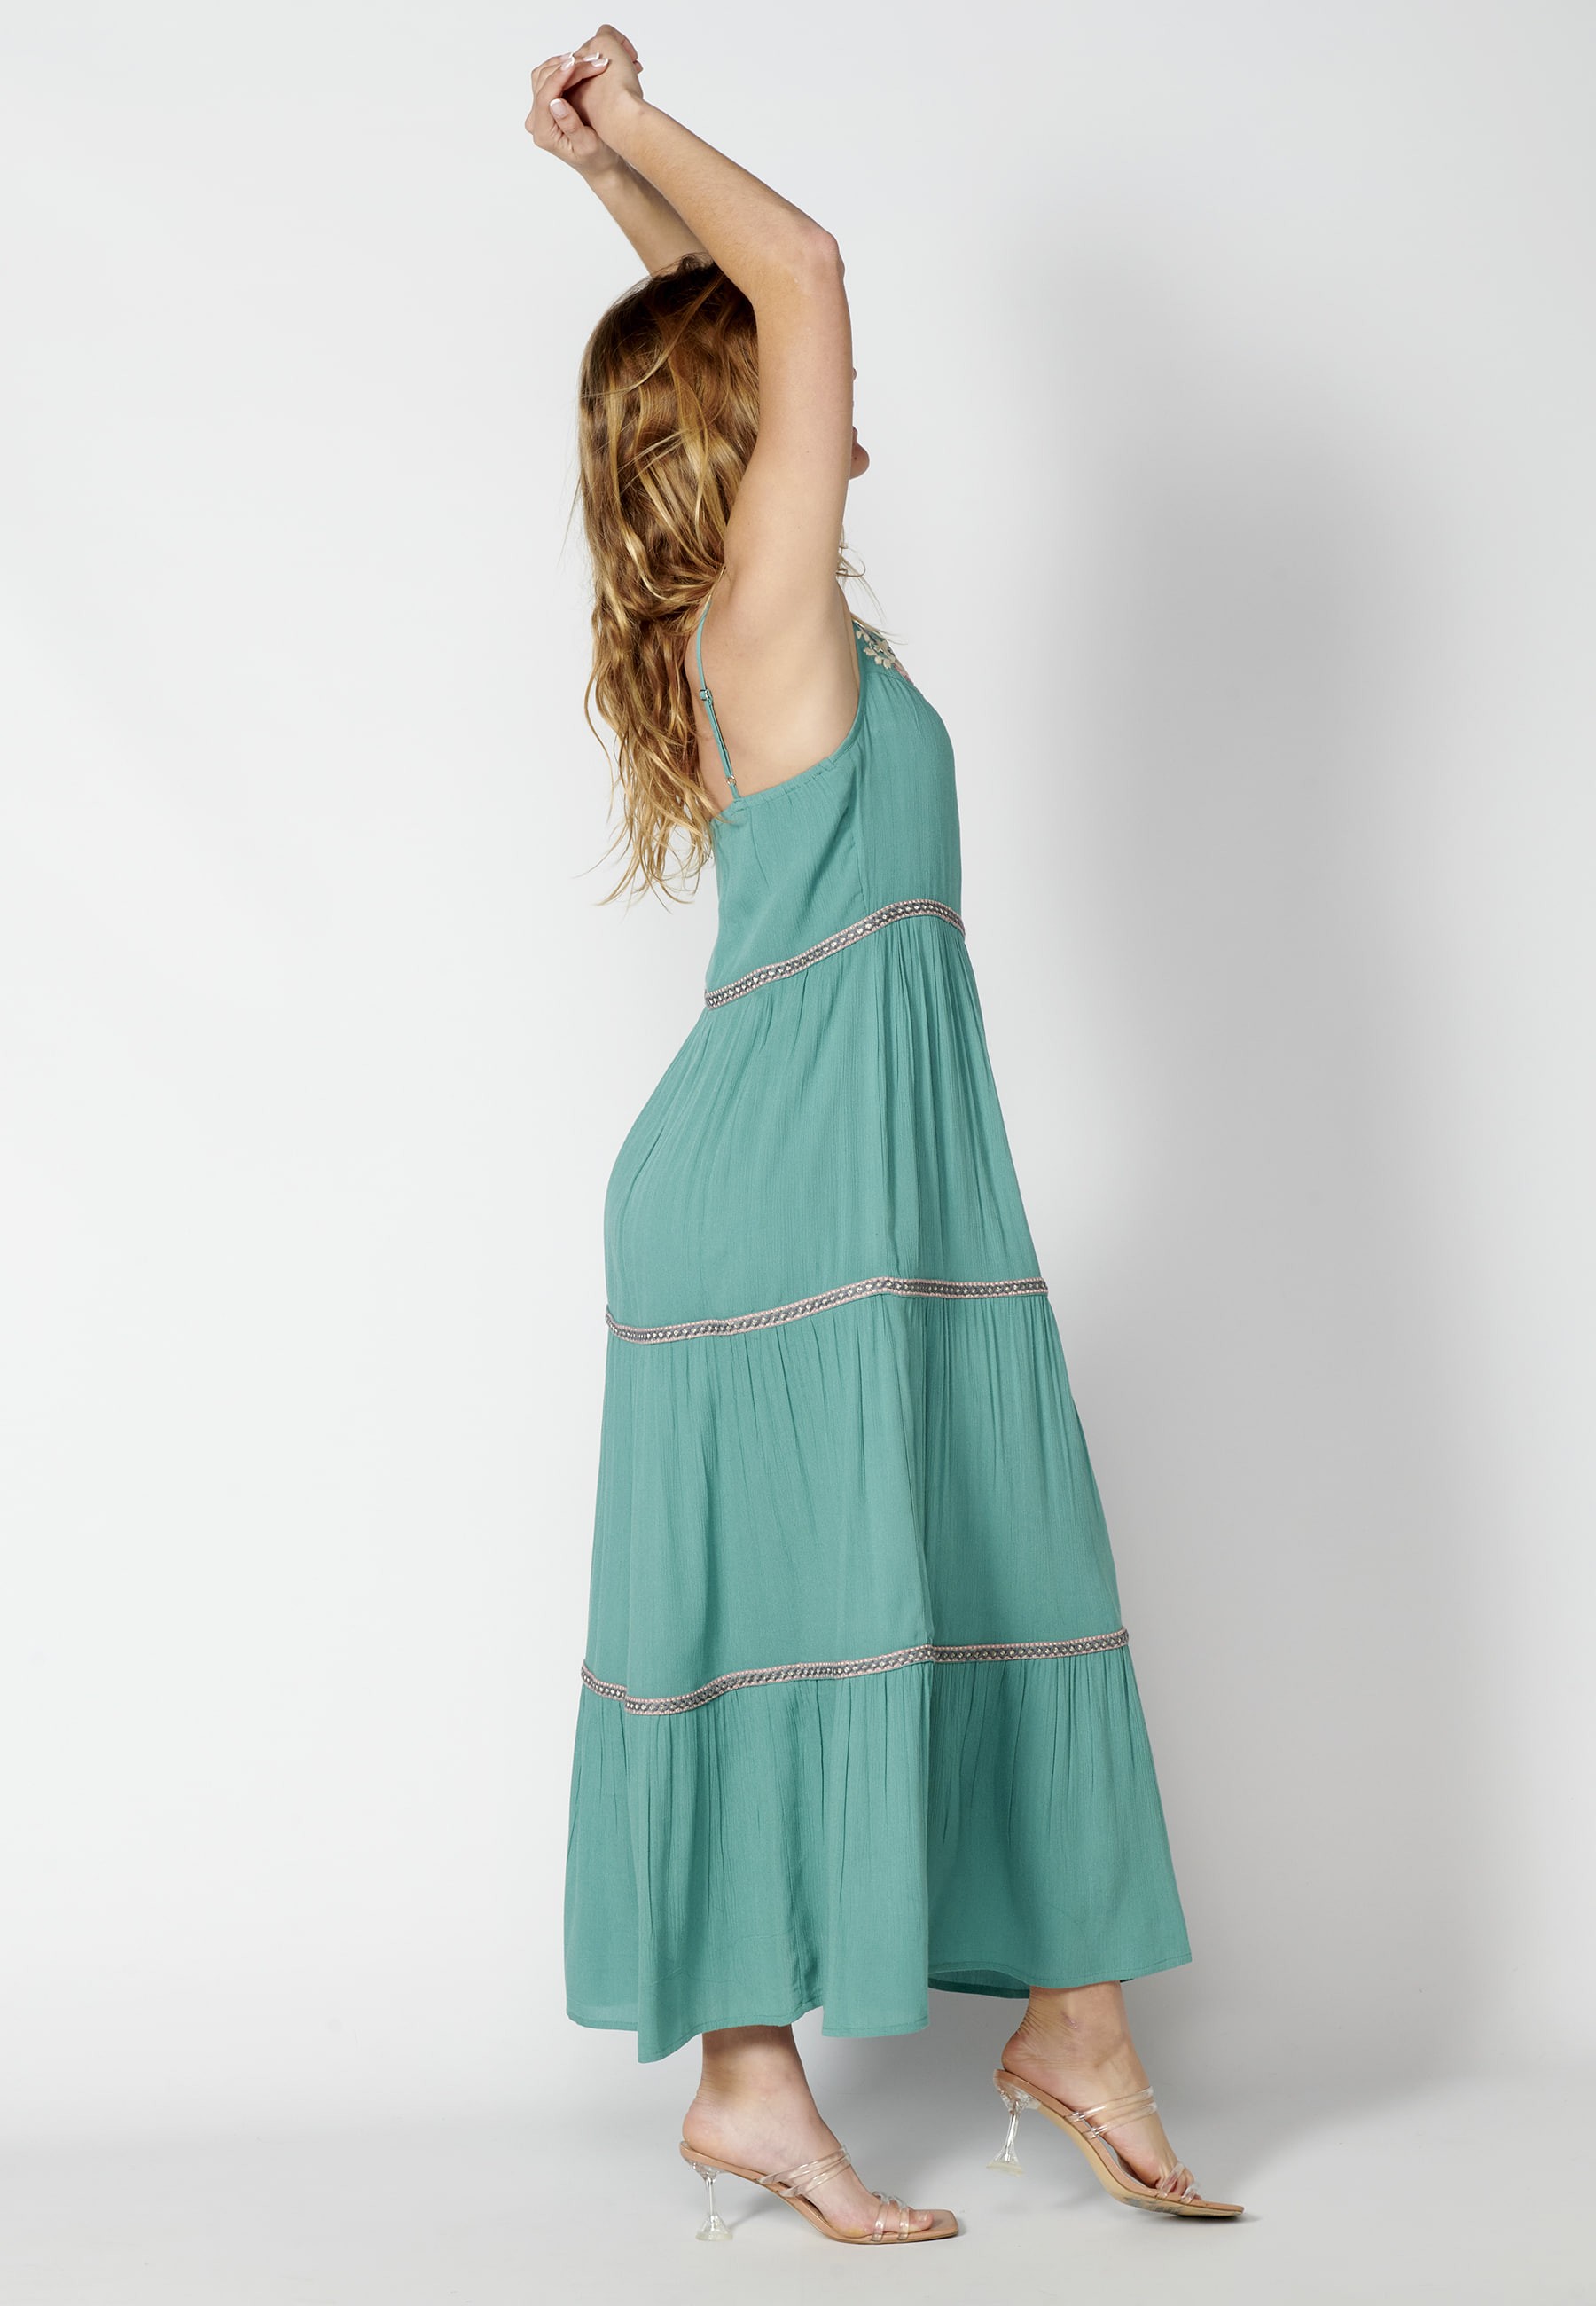 Long fluid dress with blue embroidery straps for Woman